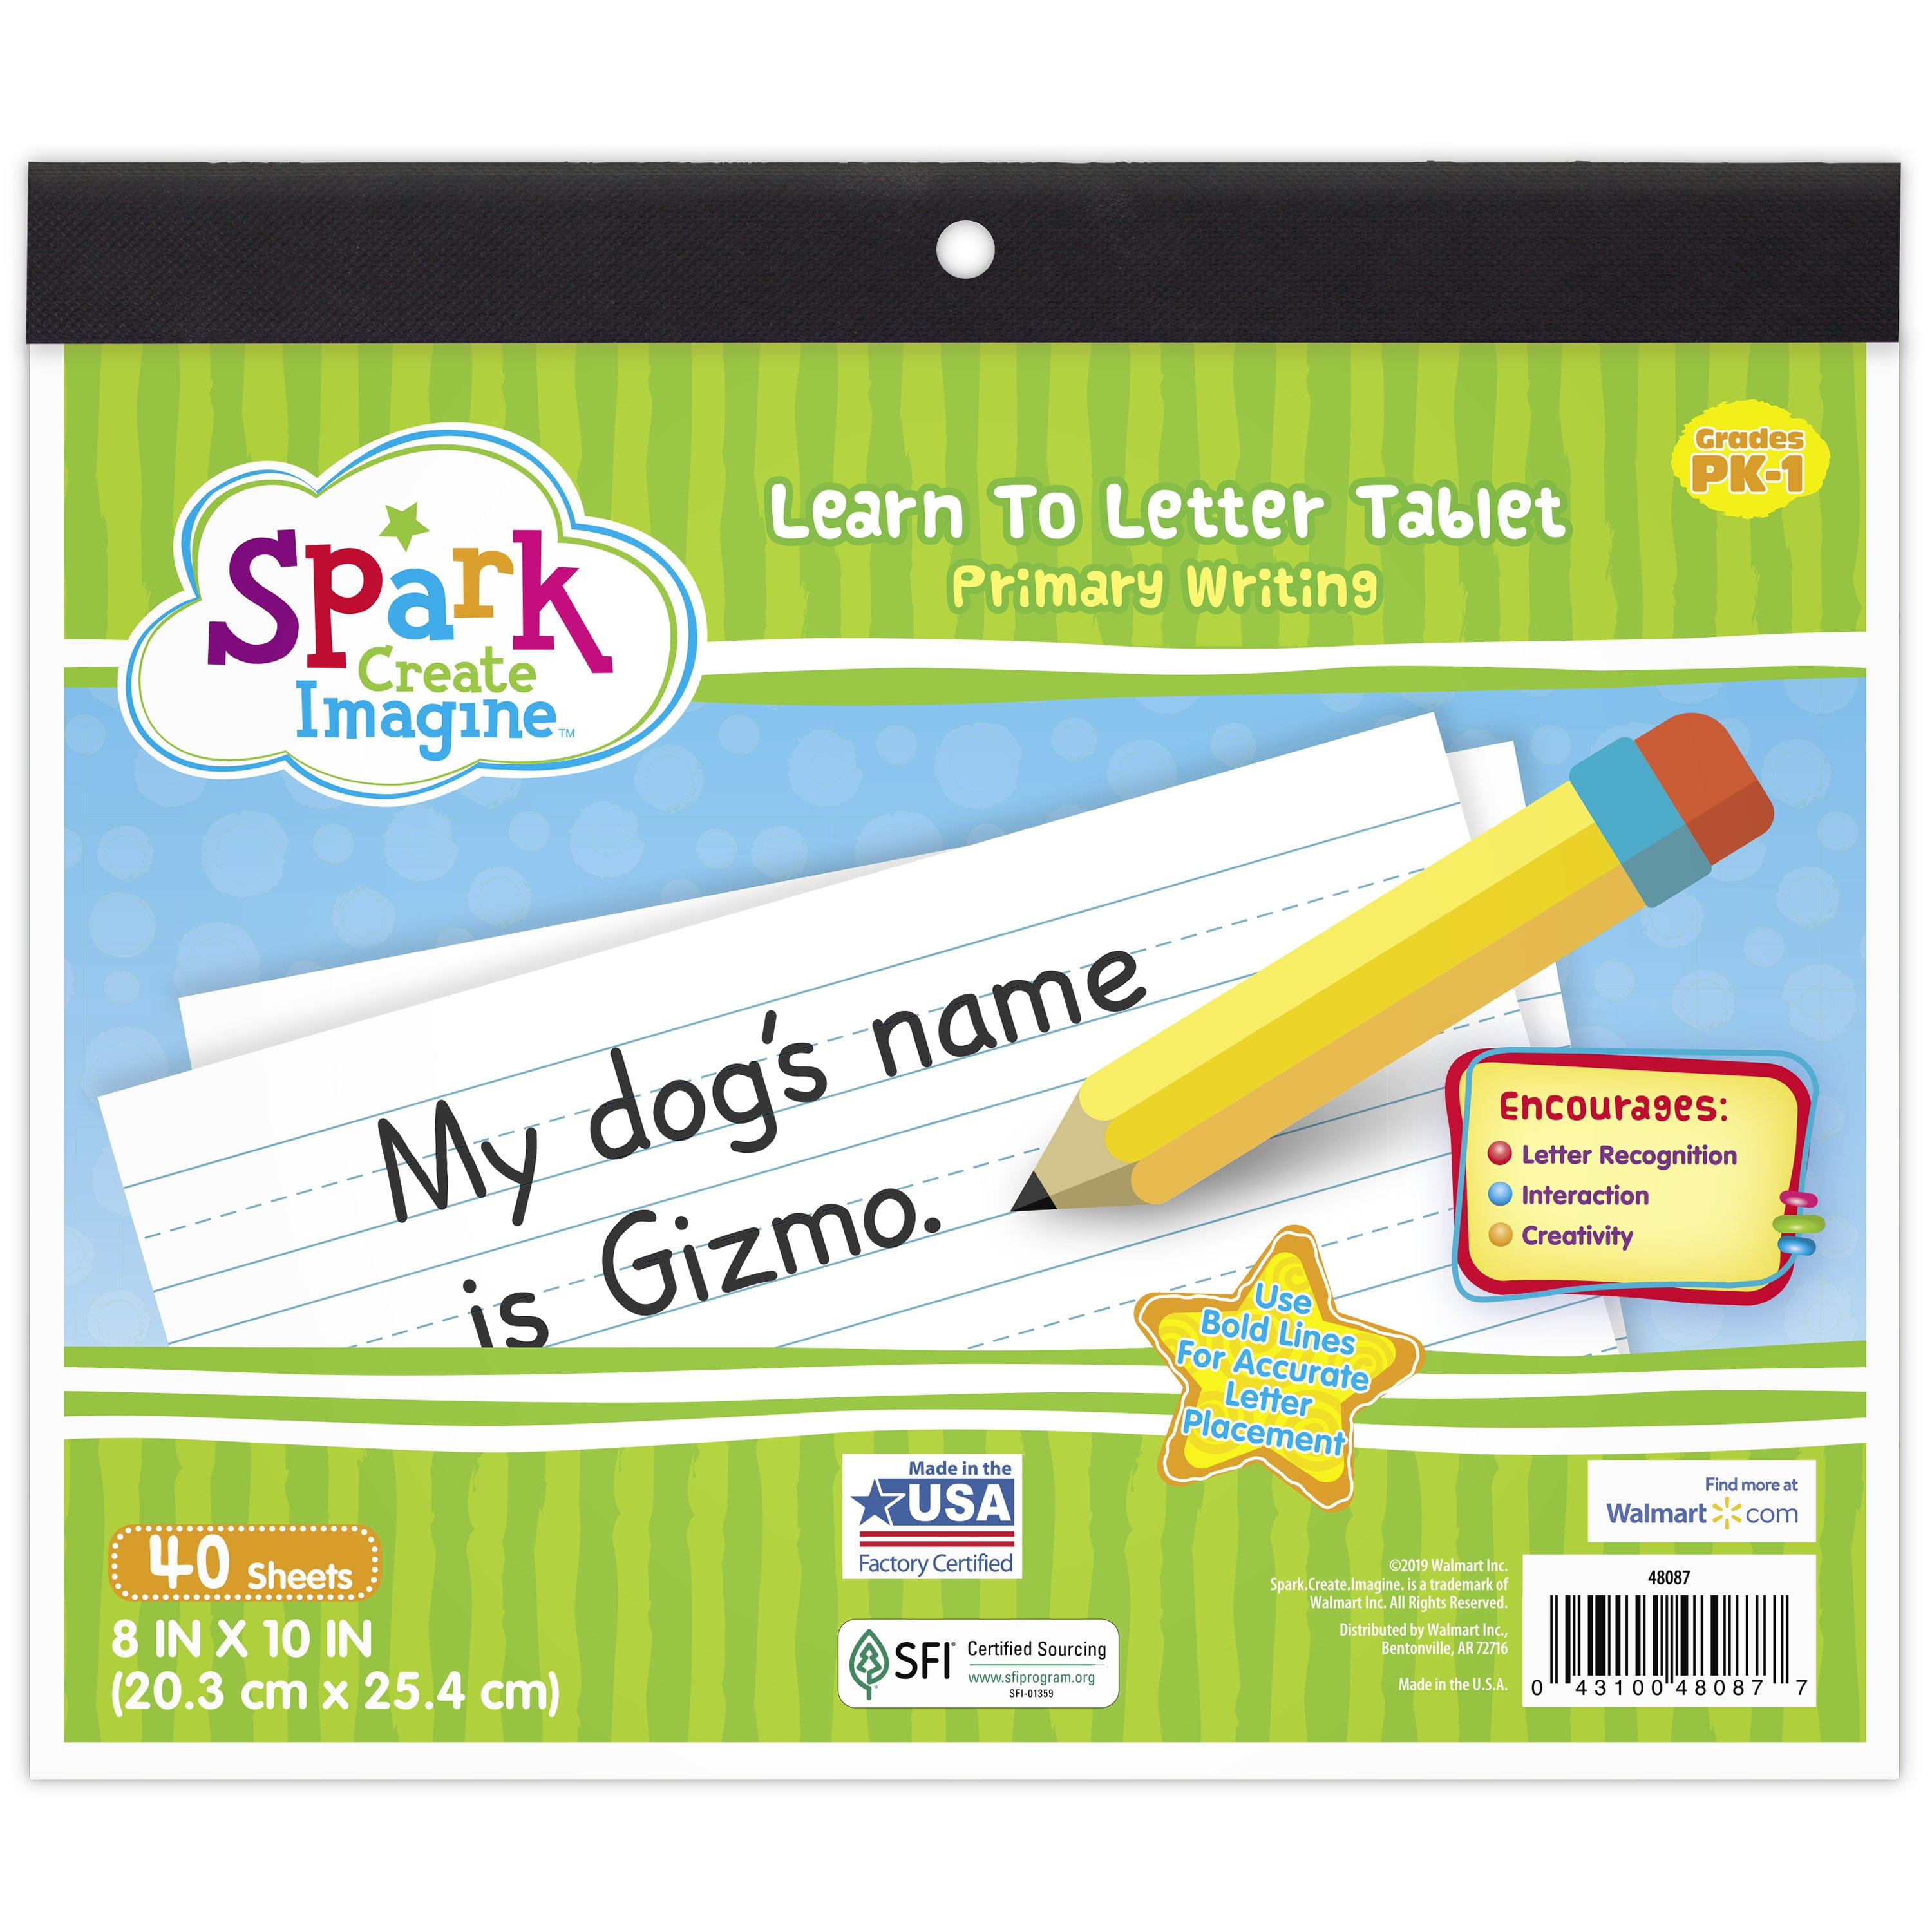 Spark Learn to Letter Writing Tablet Pad, Grades PK-1, 40 Pages, Journal, White (48087)